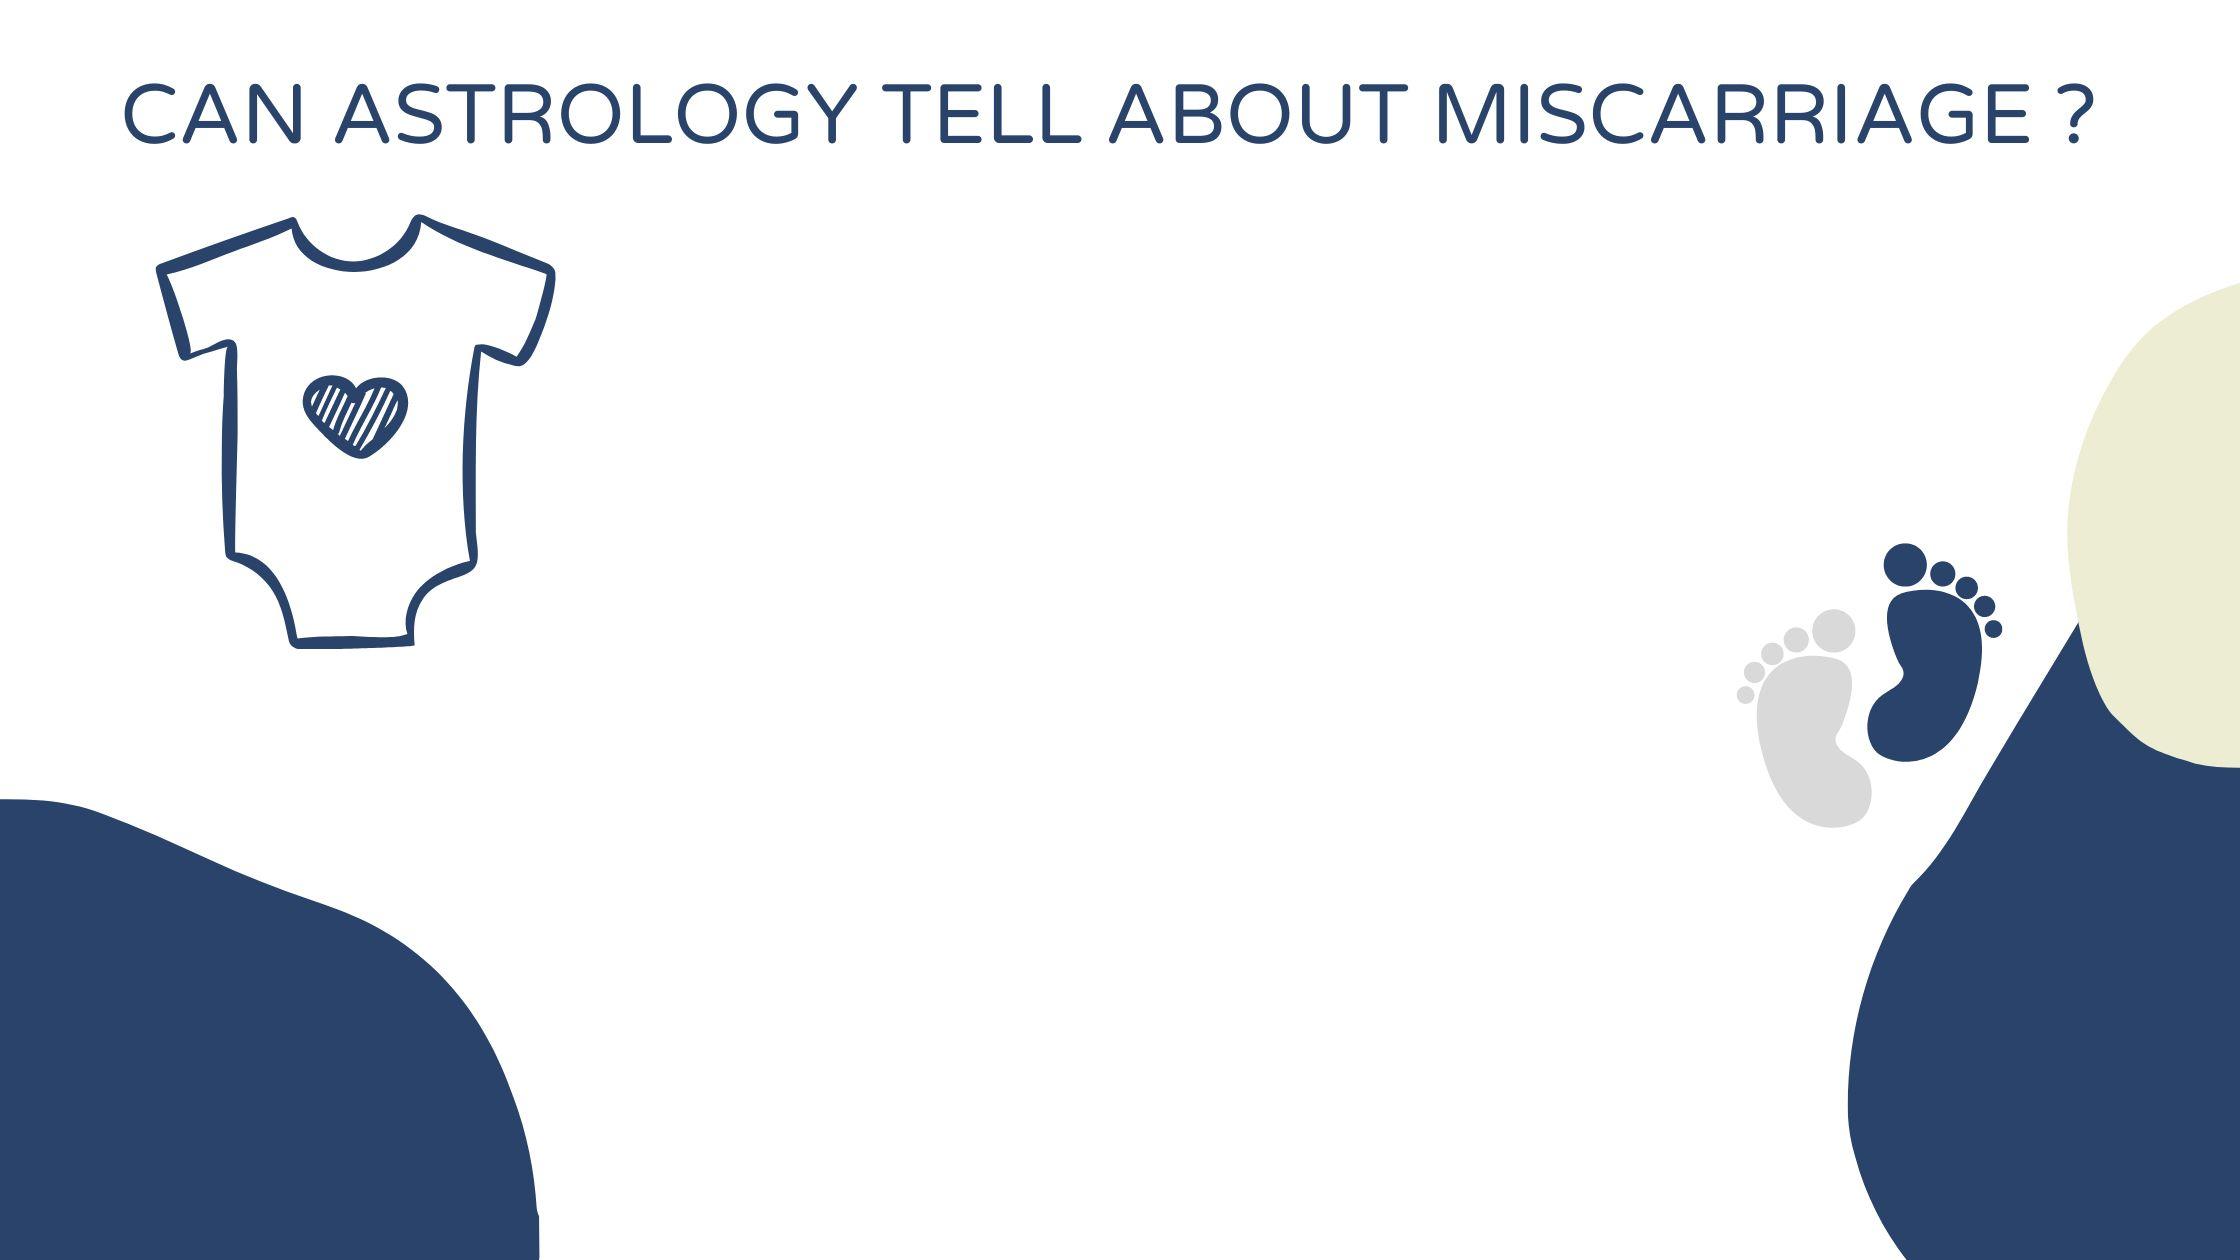 What astrology can tell about miscarriage in a person's chart.